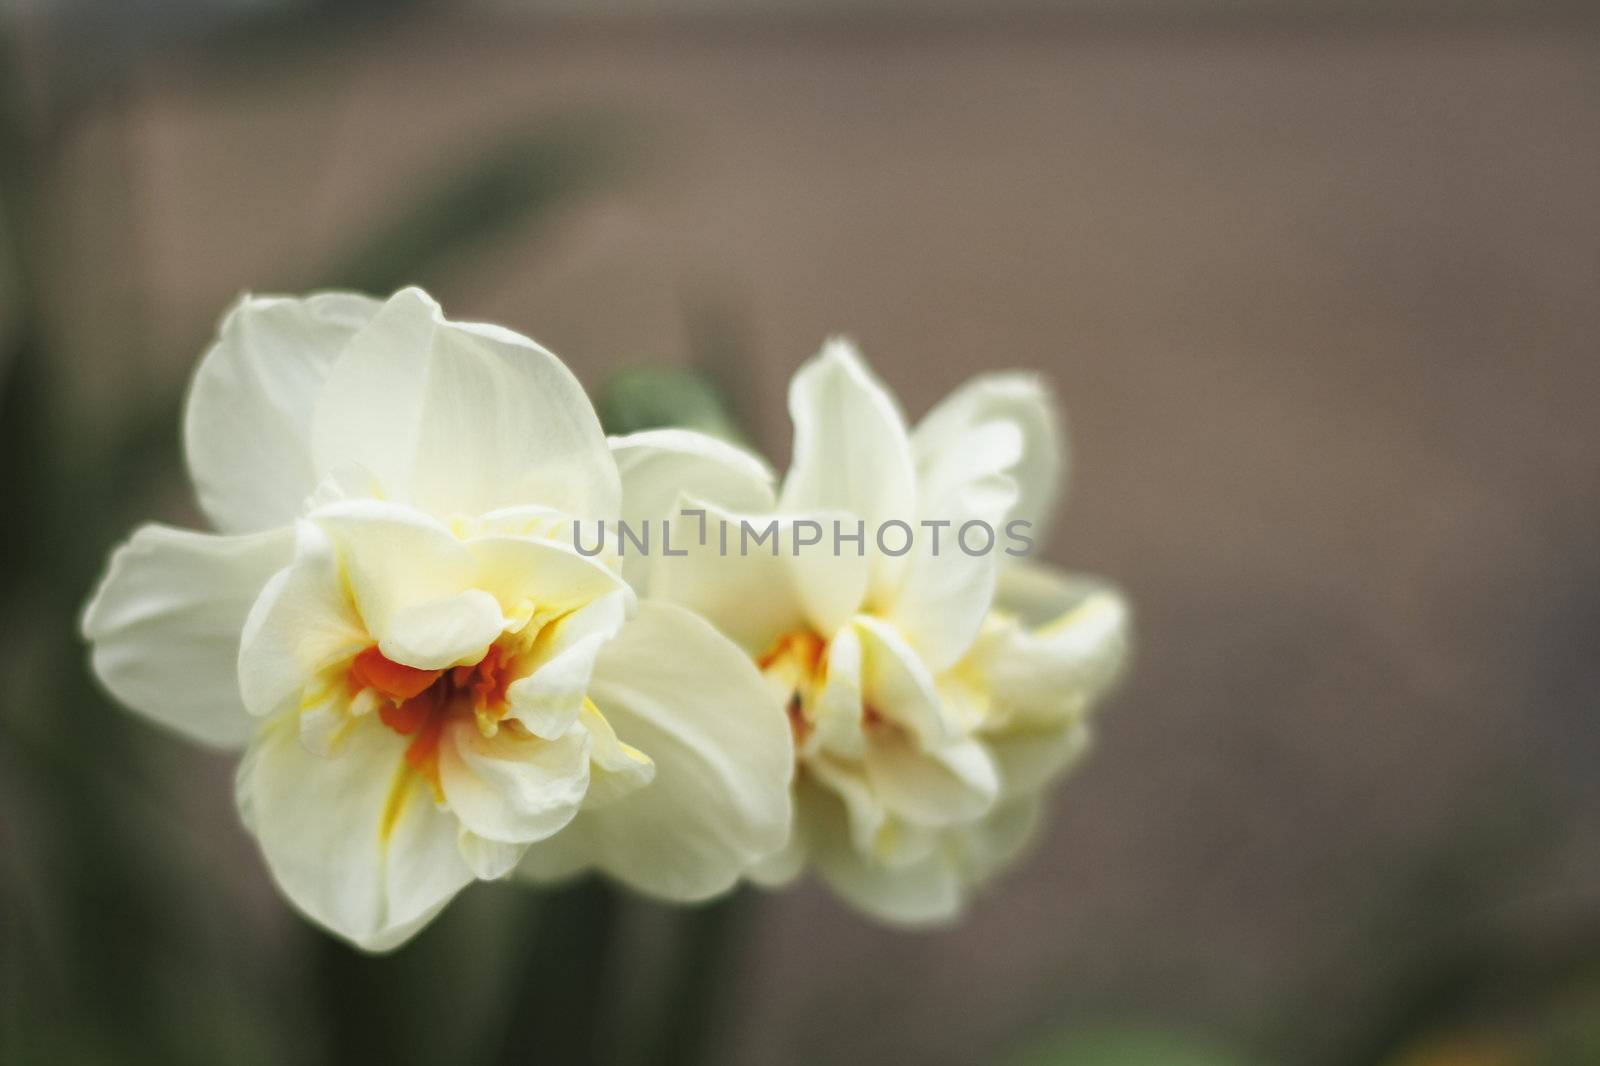 narcissis flowers by leafy